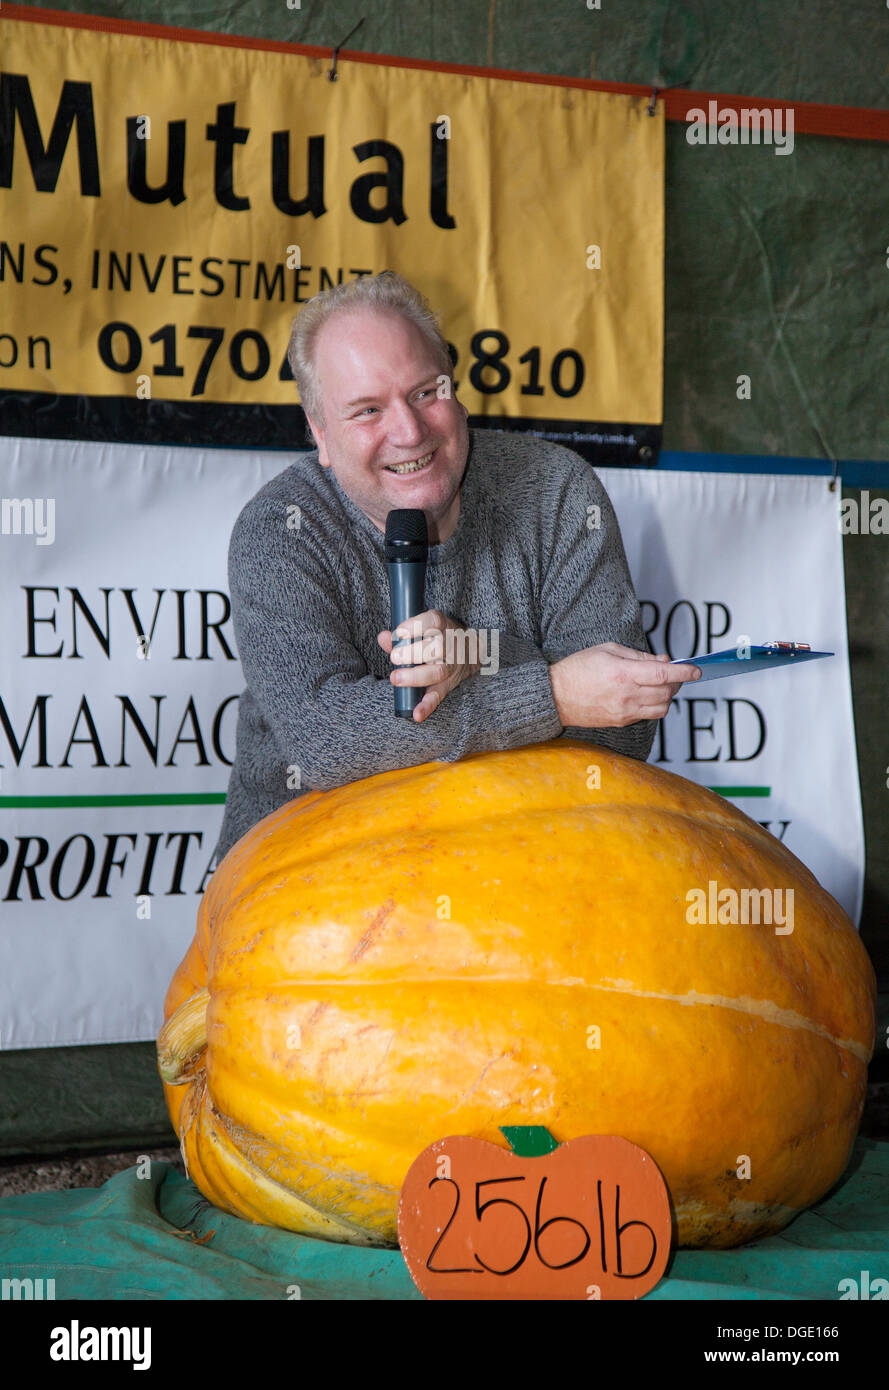 Giant Pumpkin Competition  Southport, UK.  19th October, 2013. Mr Dave Turley, compere, with his entry at the Mere Brow Giant Pumpkin Competition.  The event marks the 19th year of the event and as always raises as much money as possible for charity. HUGE pumpkins were on display at the annual celebration of the popular vegetable.  Mere Brow is a small village in Lancashire, England, situated between Tarleton and Banks. Stock Photo